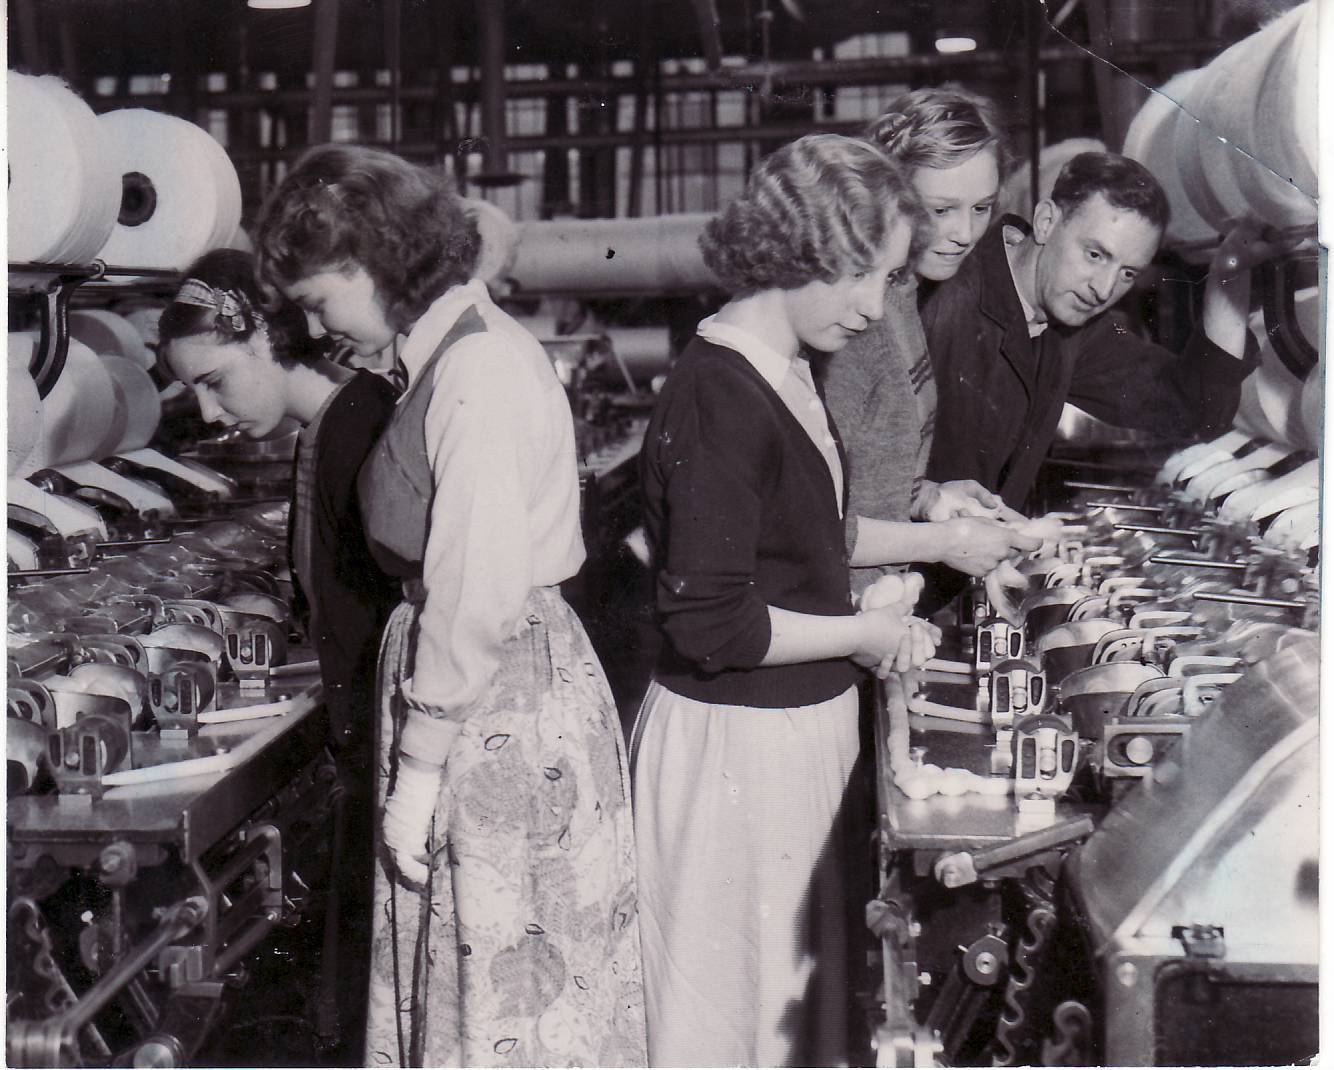 Workers at Swan Lane Spinning Mill, Bolton, in the 1950s